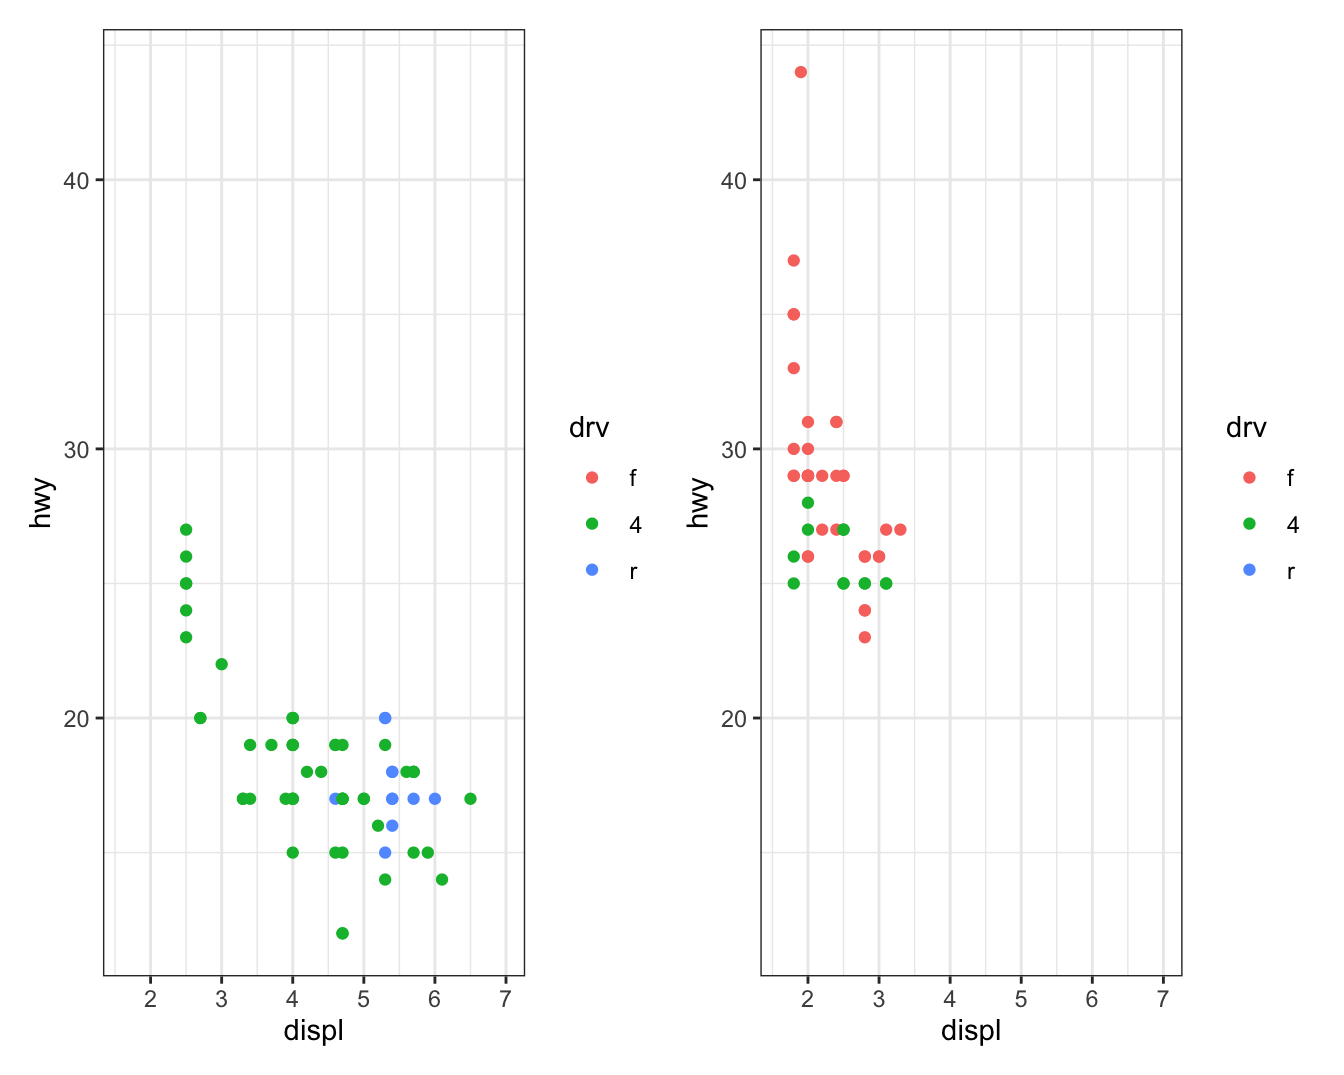 On the left, a scatterplot of highway mileage vs. displacement of SUVs.
On the right, a scatterplot of the same variables for compact cars.
Points are colored by drive type for both plots. Both plots are plotted
on the same scale for highway mileage, displacement, and drive type,
resulting in the legend showing all three types (front, rear, and 4-wheel
drive) for both plots even though there are no front-wheel drive SUVs and
no rear-wheel drive compact cars. Since the x and y scales are the same,
and go well beyond minimum or maximum highway mileage and displacement,
the points do not take up the entire plotting area.